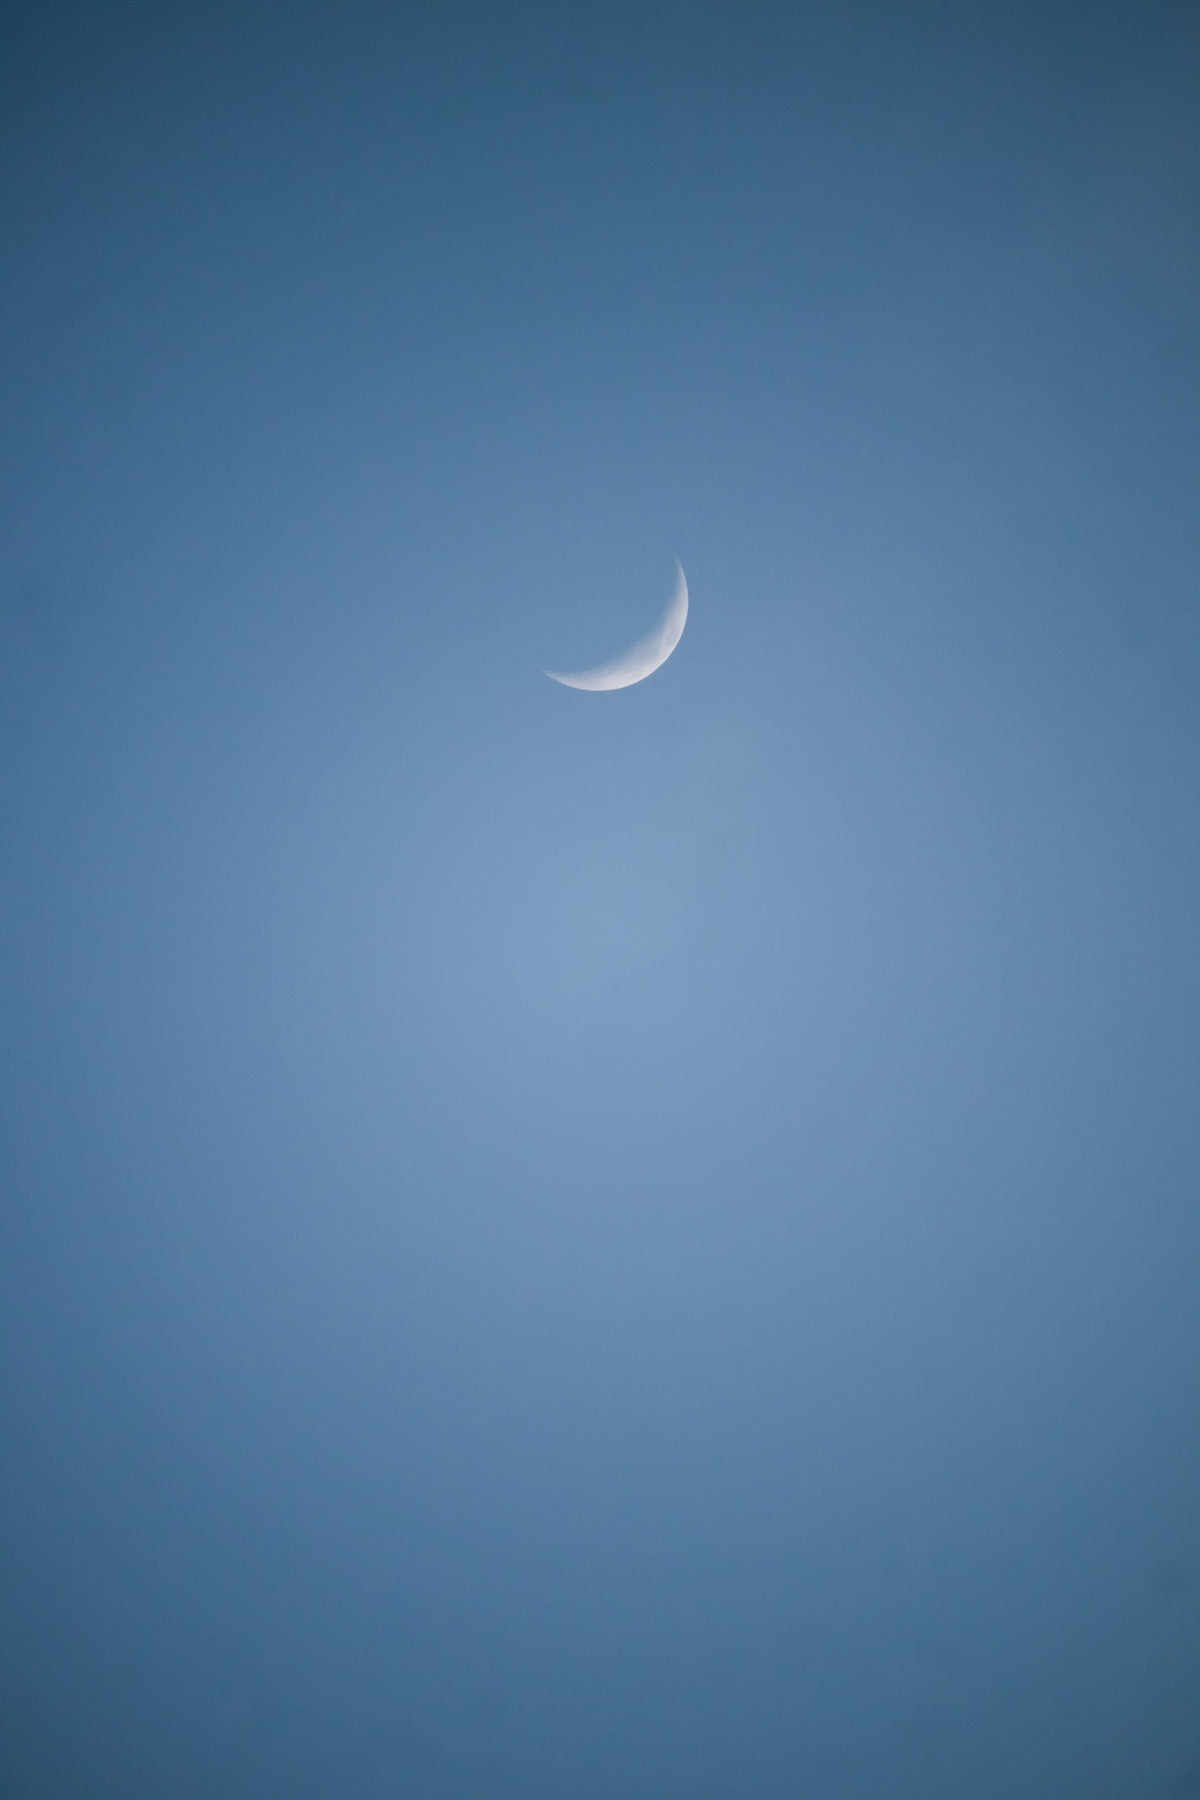 small sliver of the moon in a blue sky